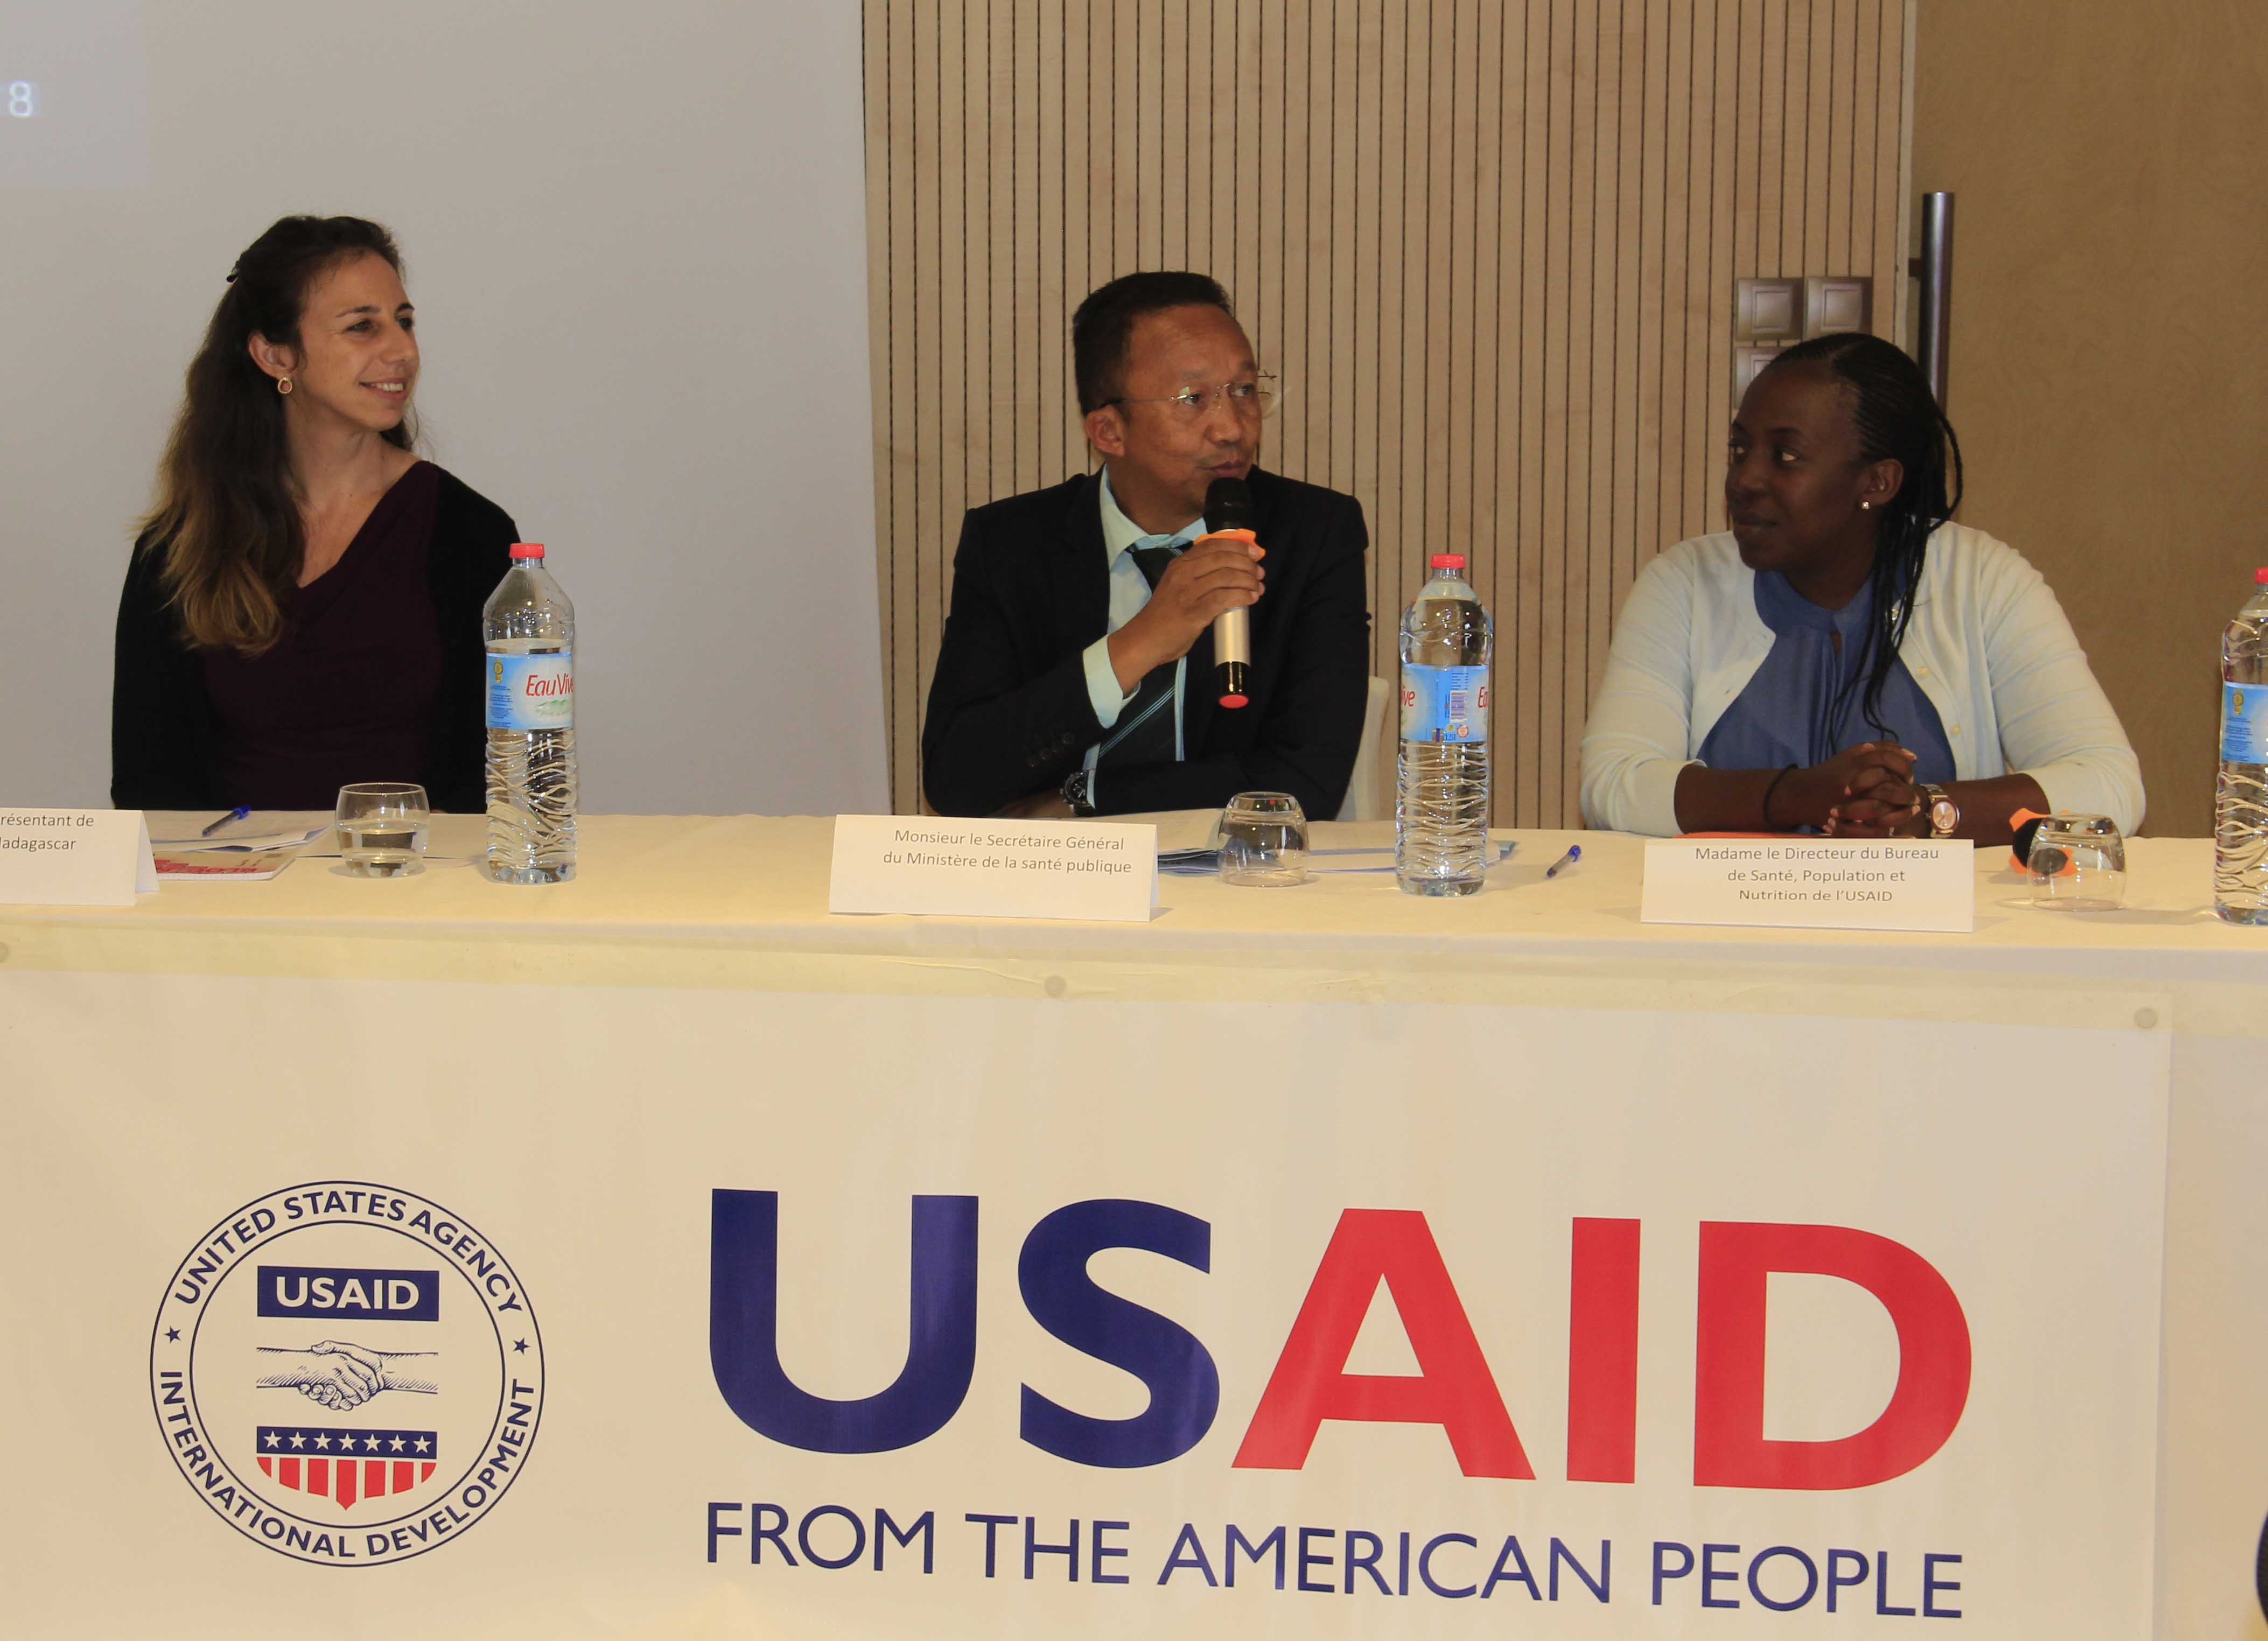 Madagascar Secretary General, Ratsirarson, speaking on a panel at the event. 